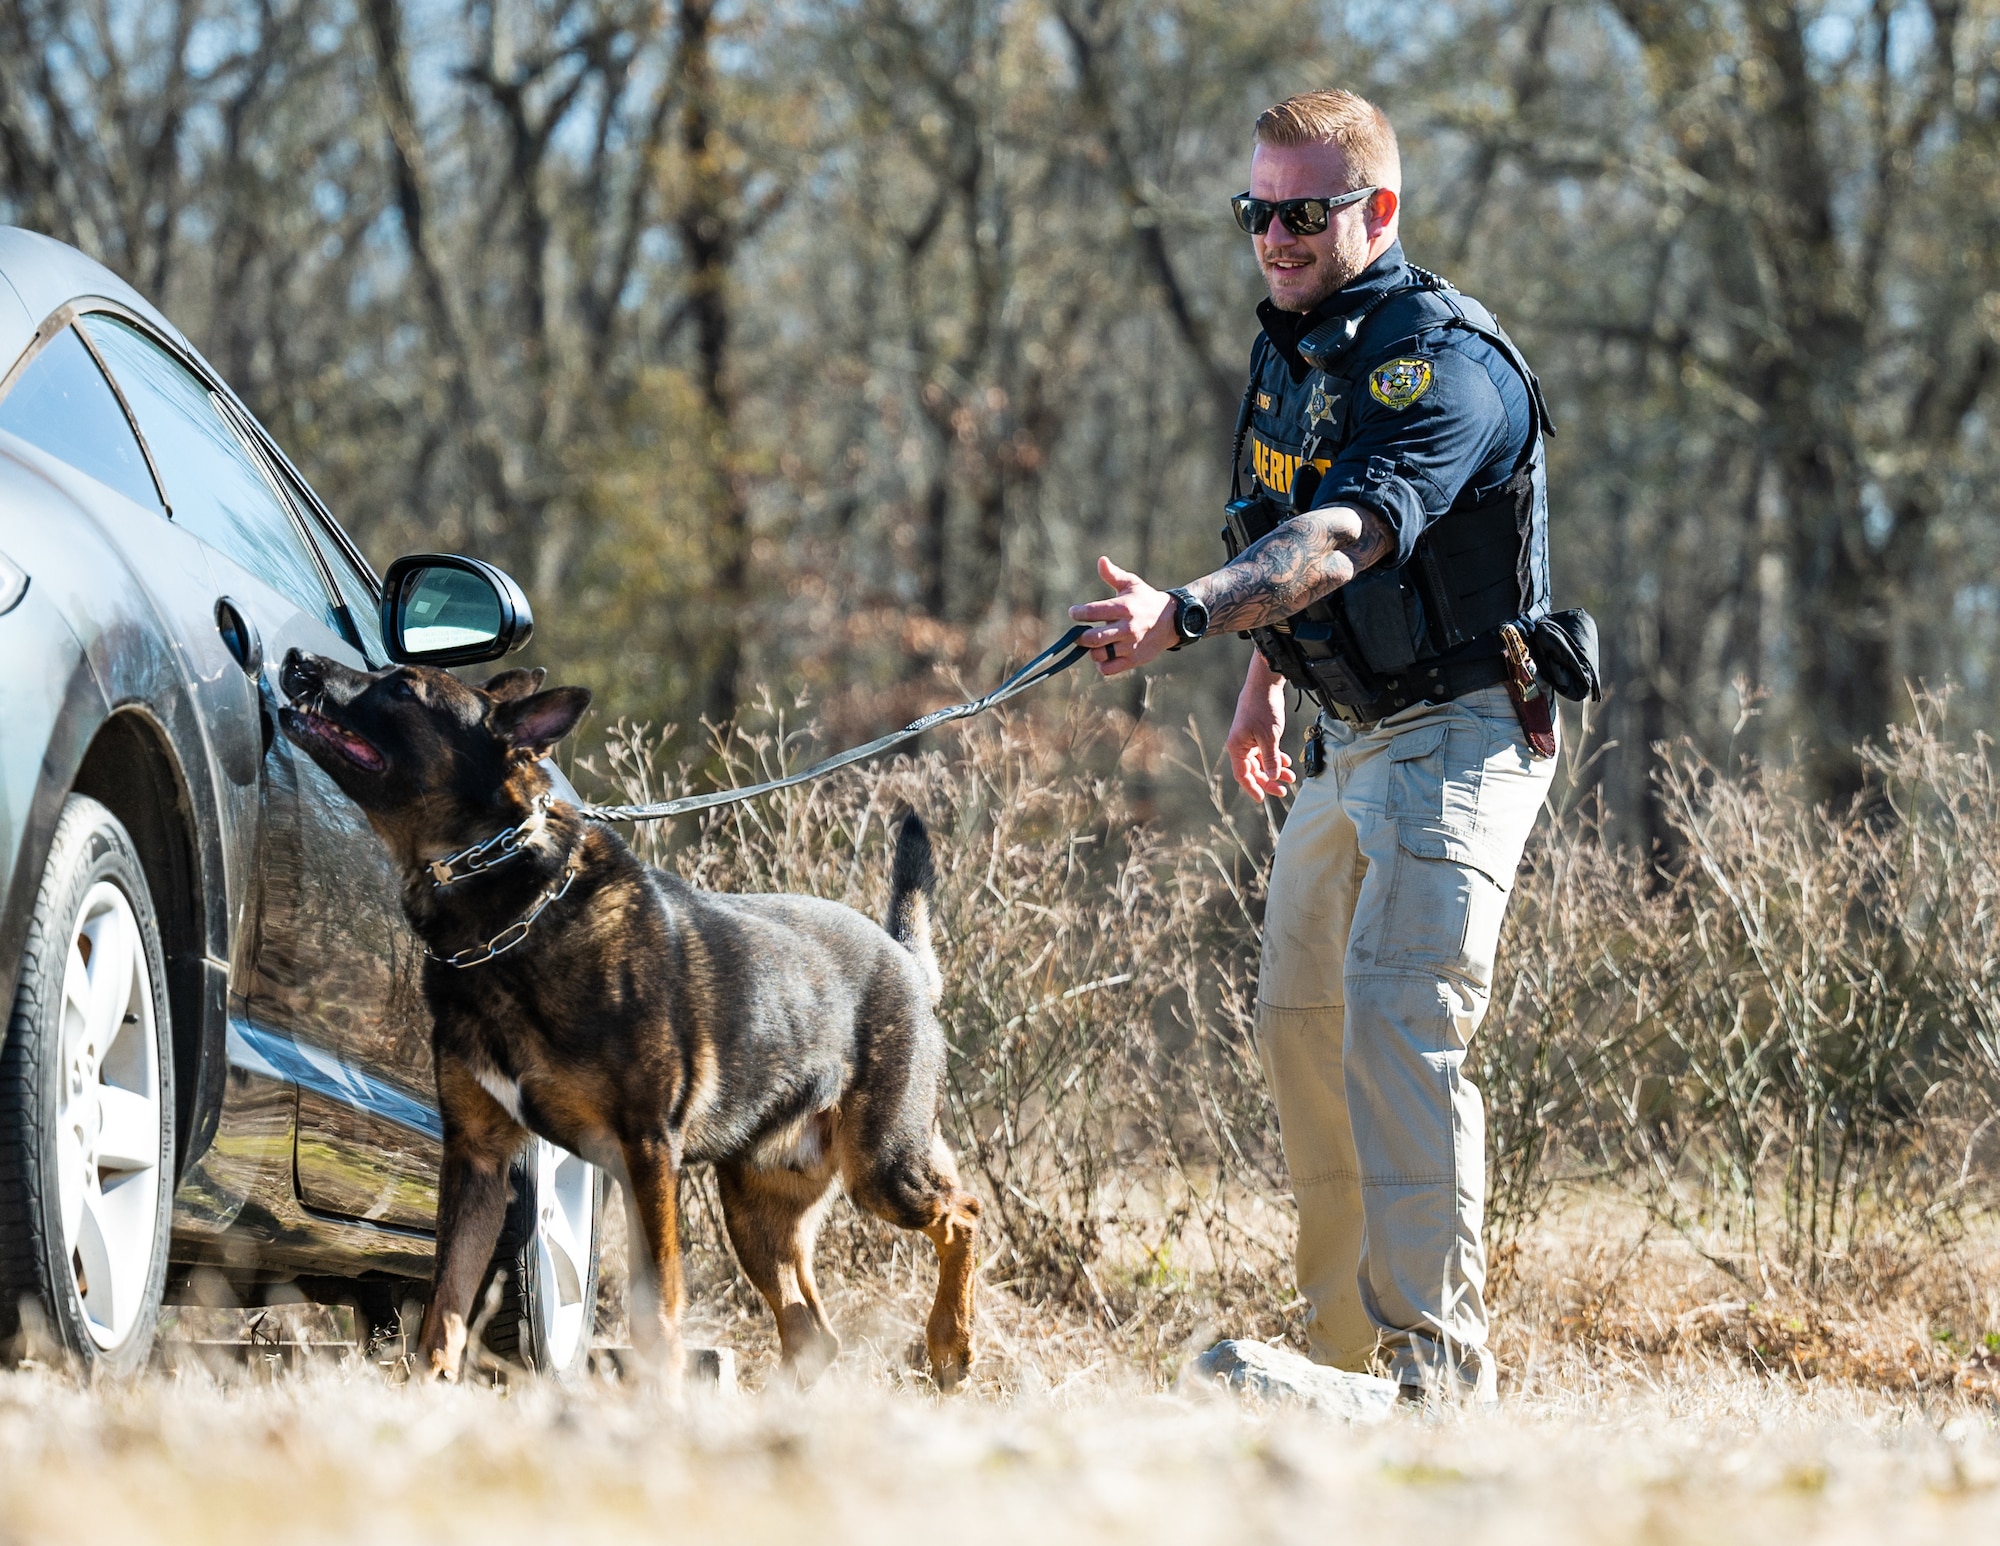 Police dogs are trained to recognize numerous controlled substances, making them a valuable asset to law enforcement agencies.